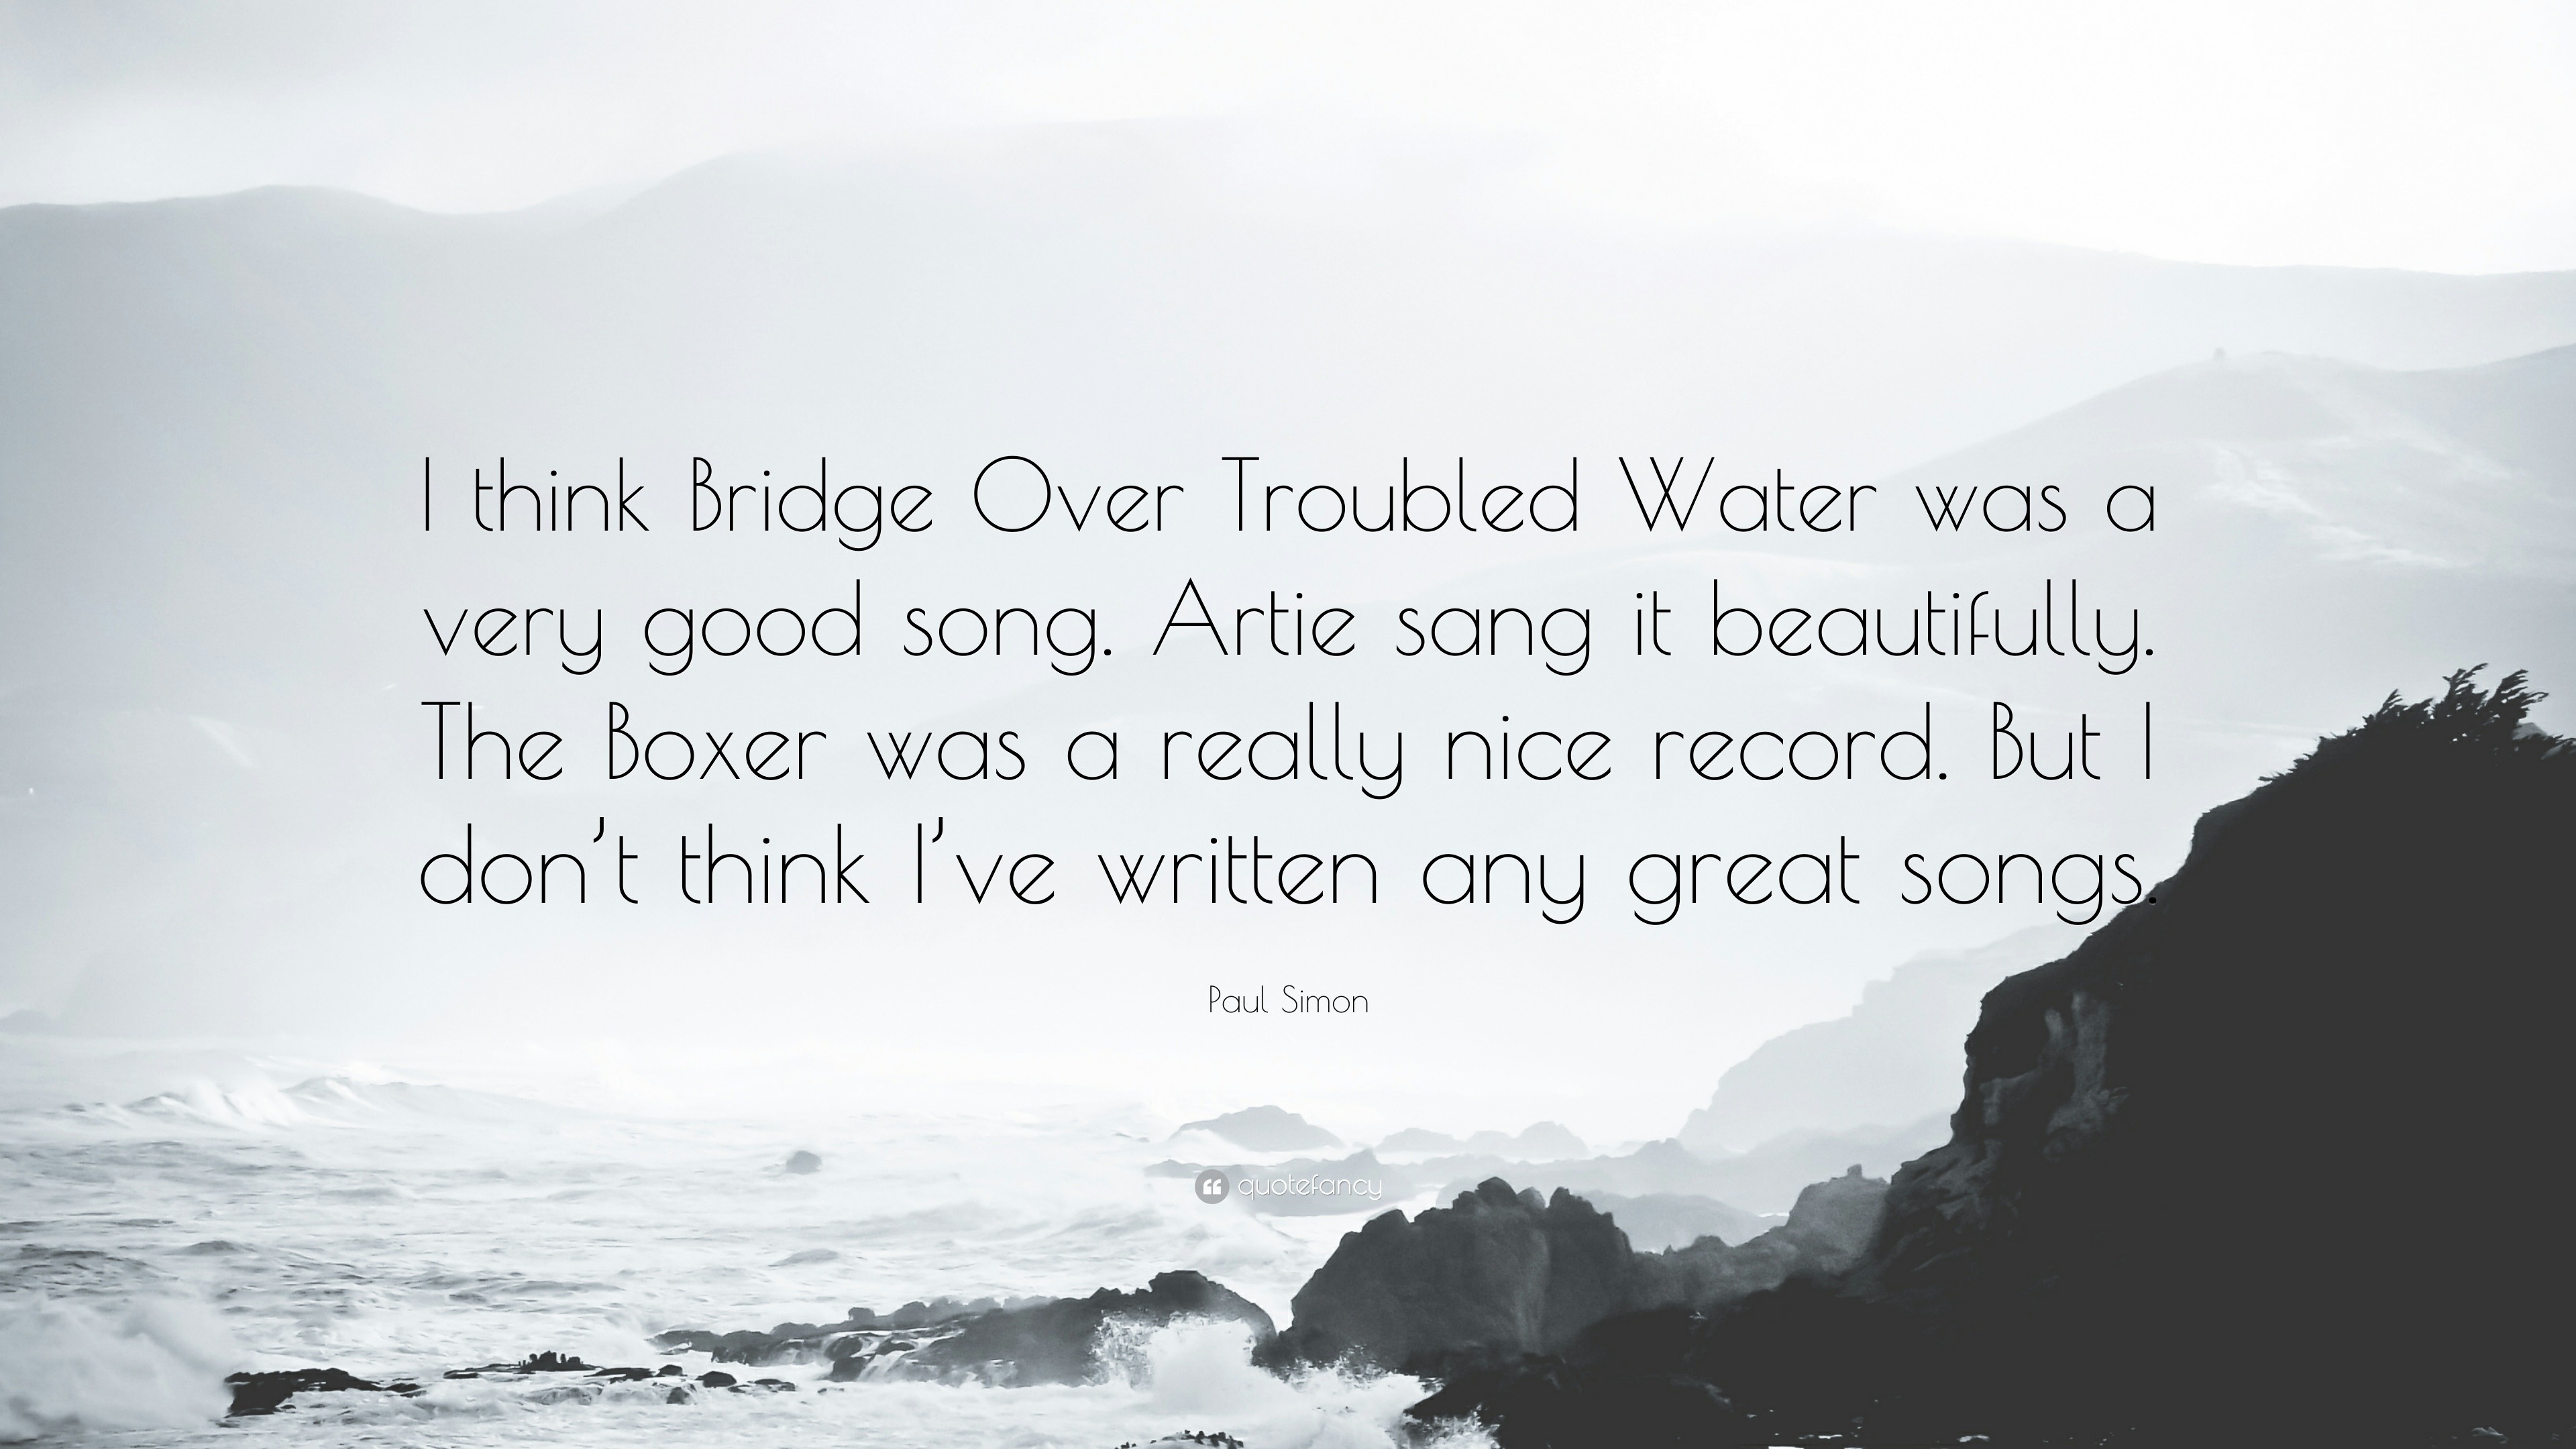 Paul Simon Quote: “I think Bridge Over Troubled Water was a very good song. Artie  sang it beautifully. The Boxer was a really nice record. ”